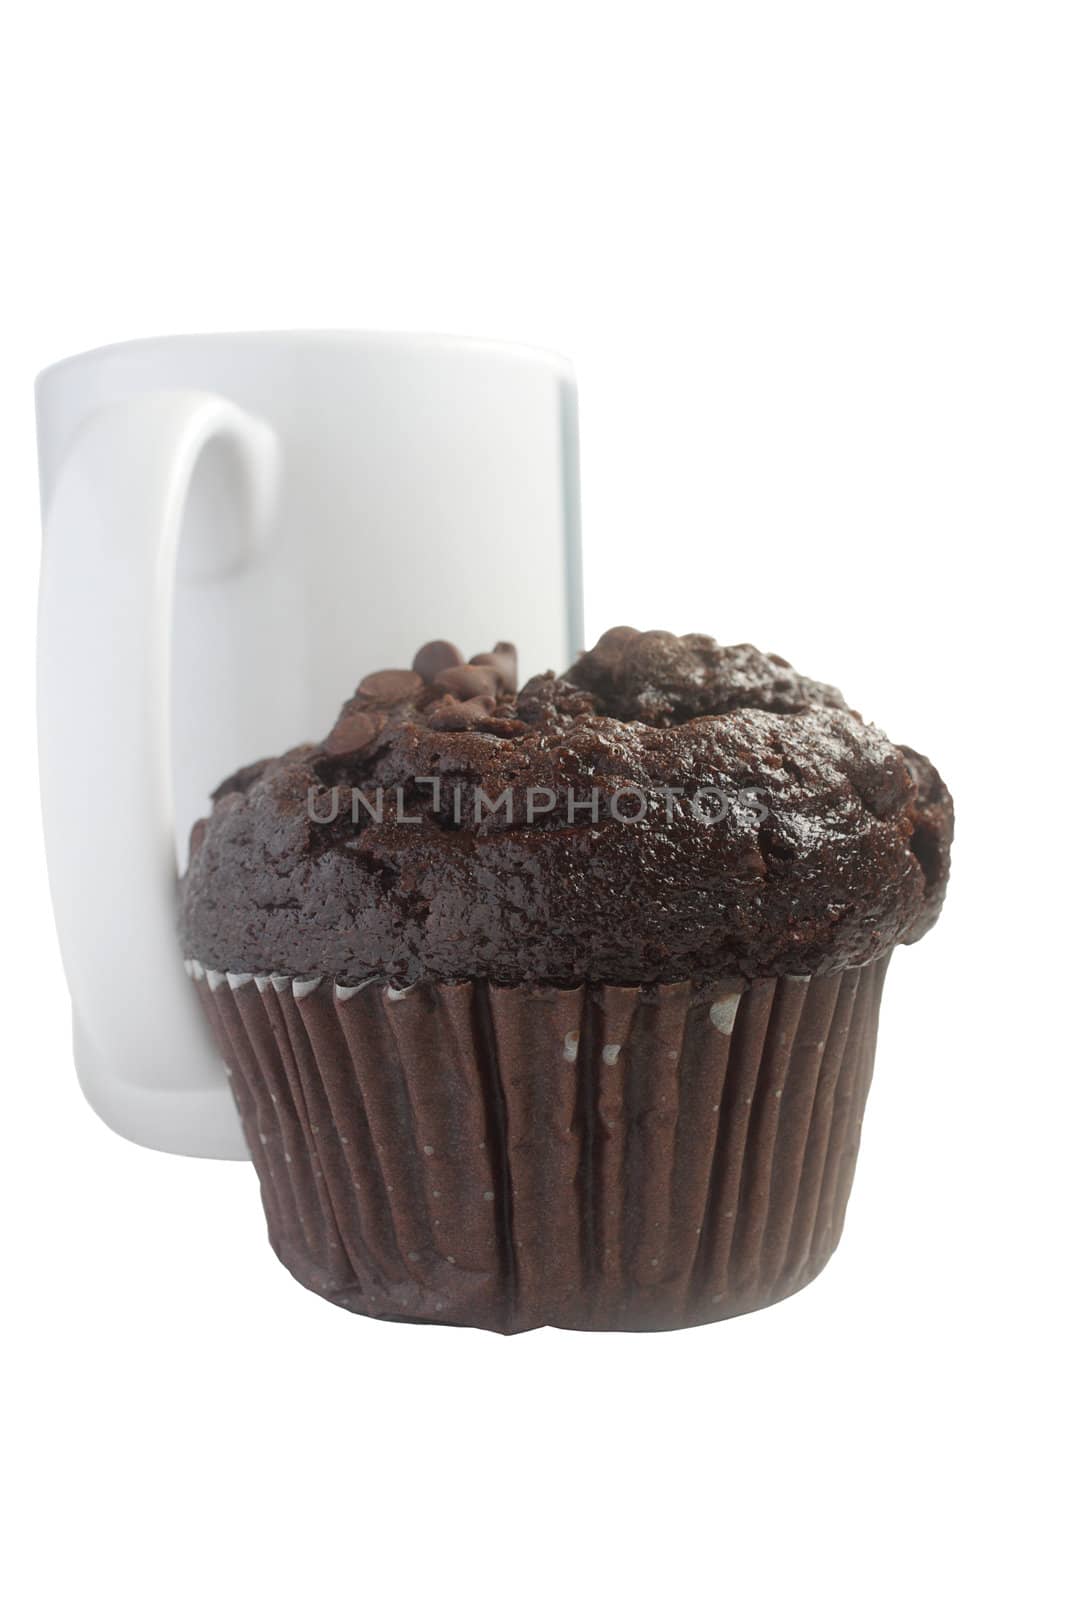 Chocolate muffin and a white cup of tea on white background